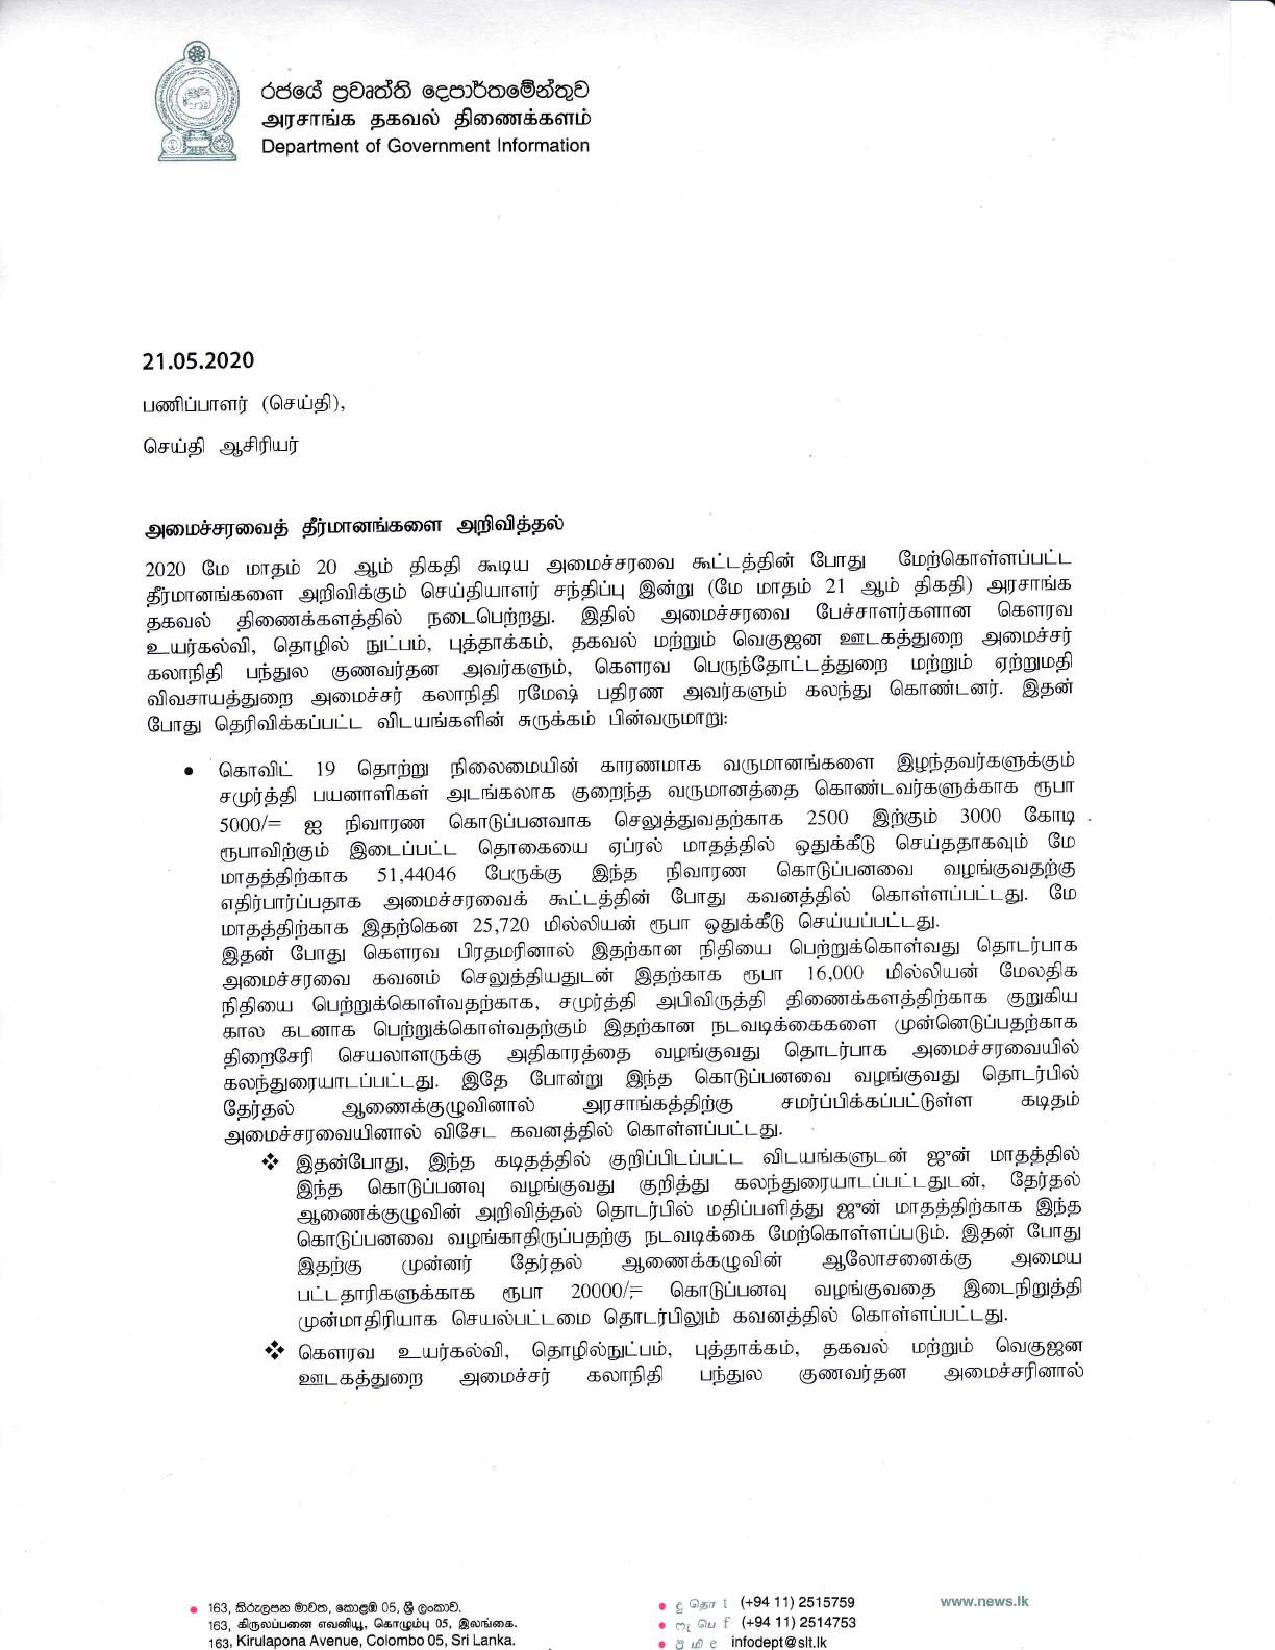 Cabinet Decisions 20.05.2020 Tamil compressed page 001